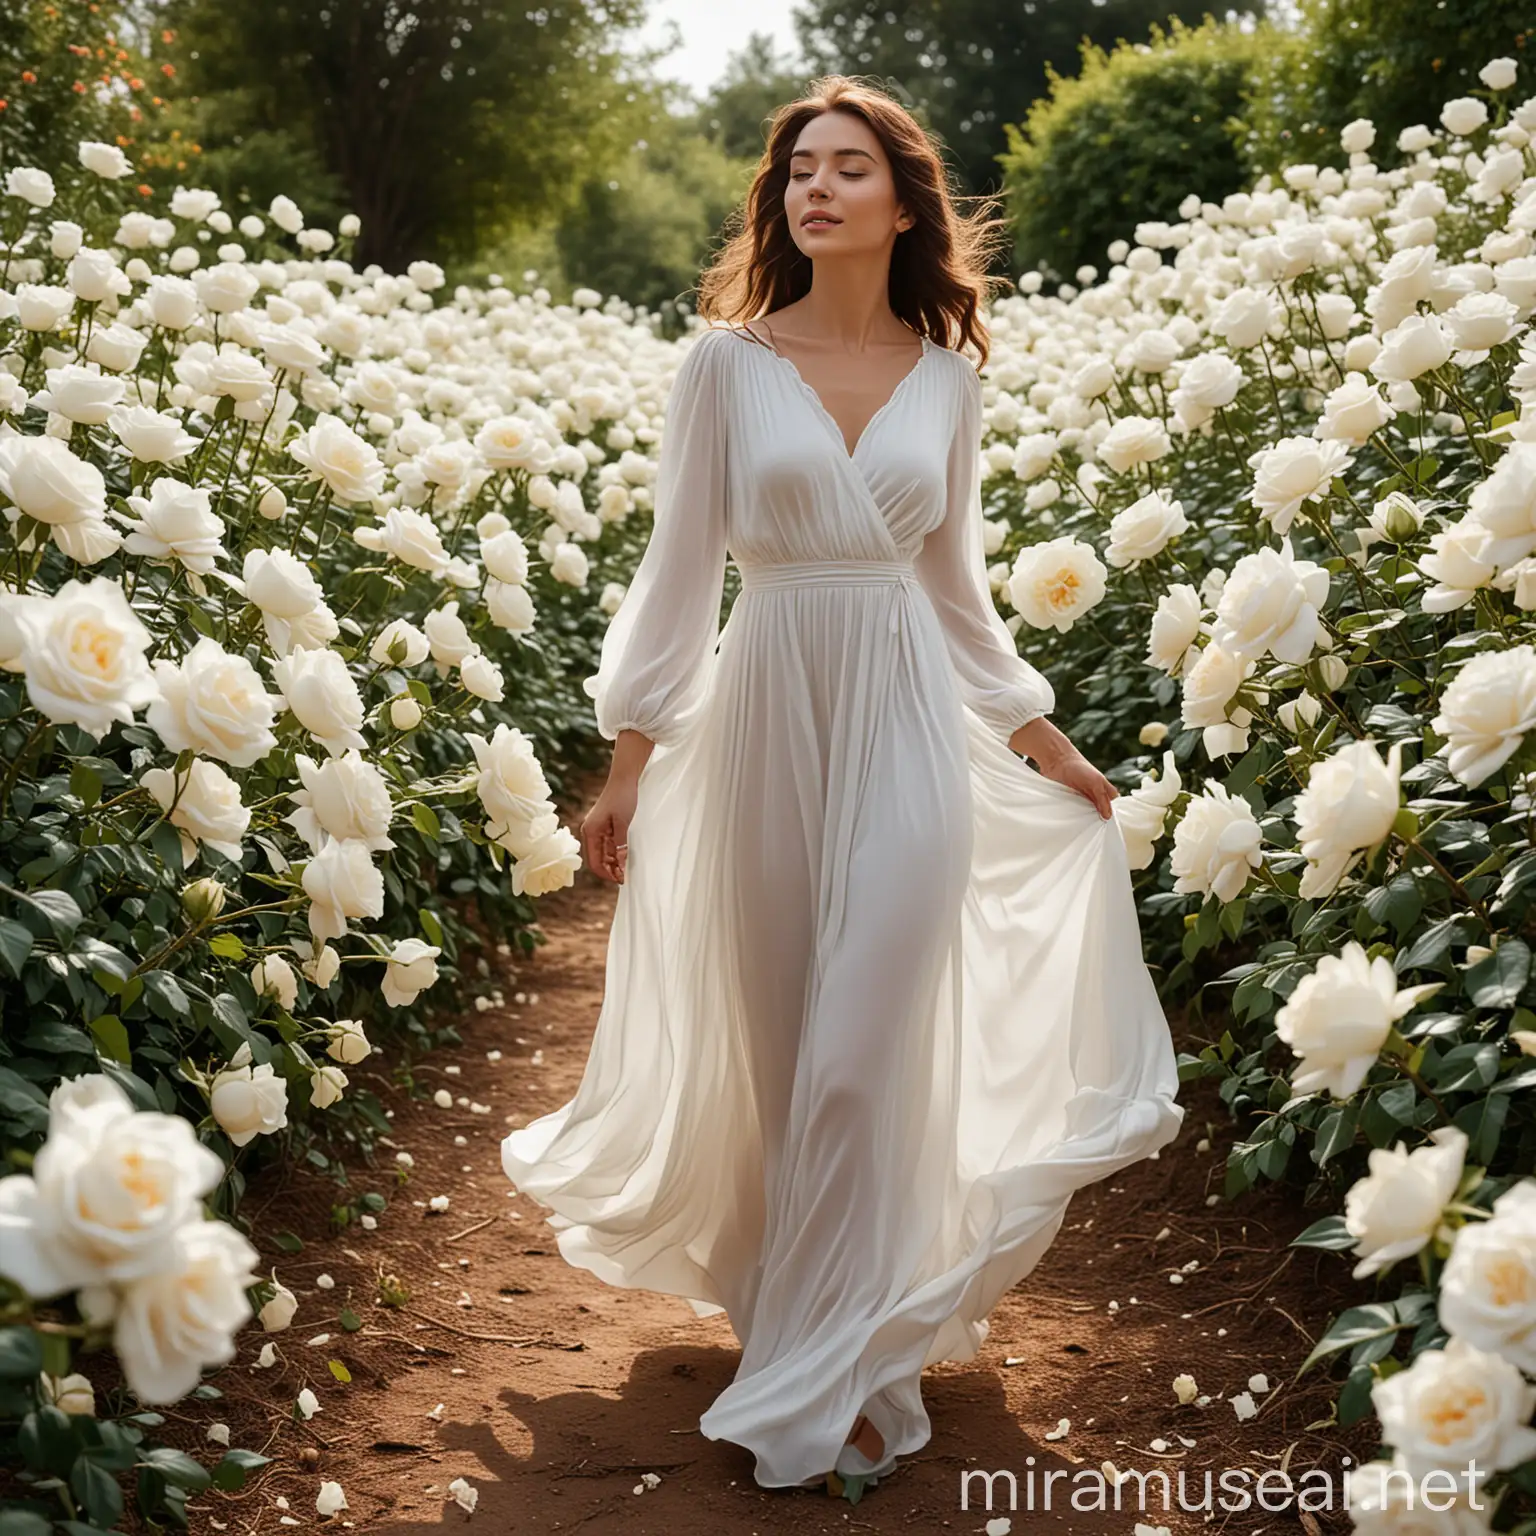 In a garden full of white roses, a woman wearing a flowing white dress walks gracefully and her face looks radiant and fair. 

